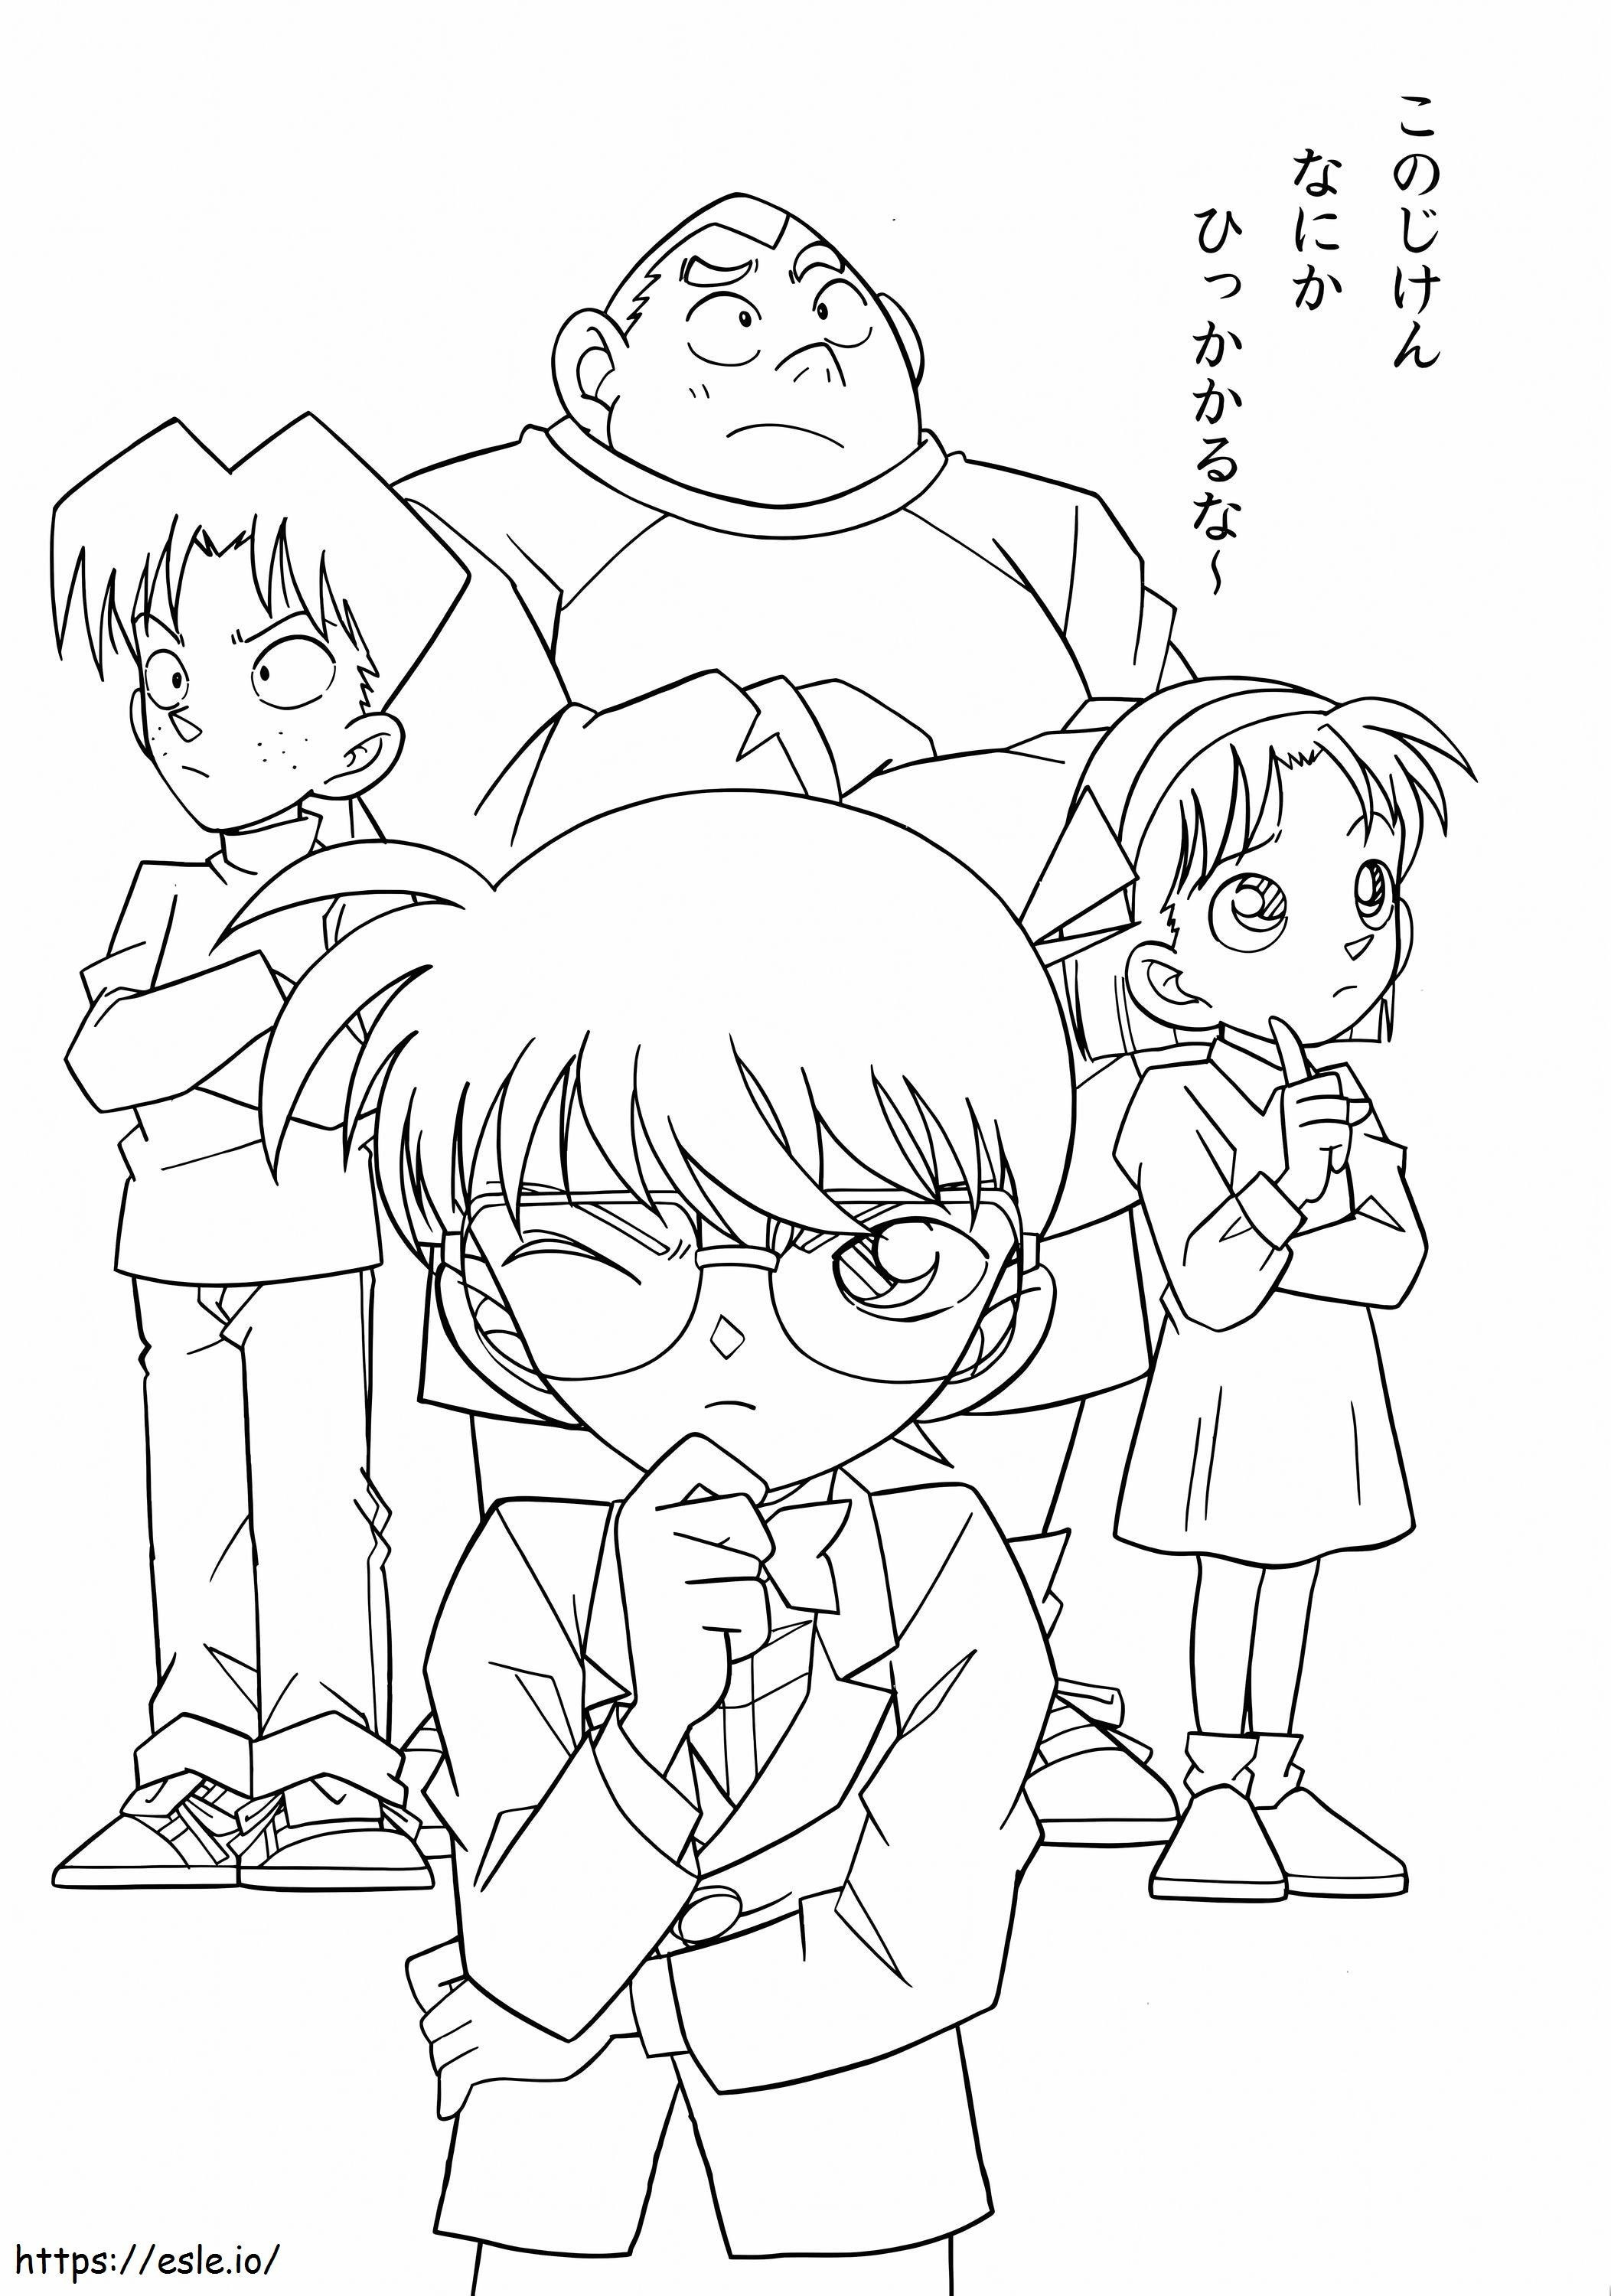 Conan And Cute Friends coloring page